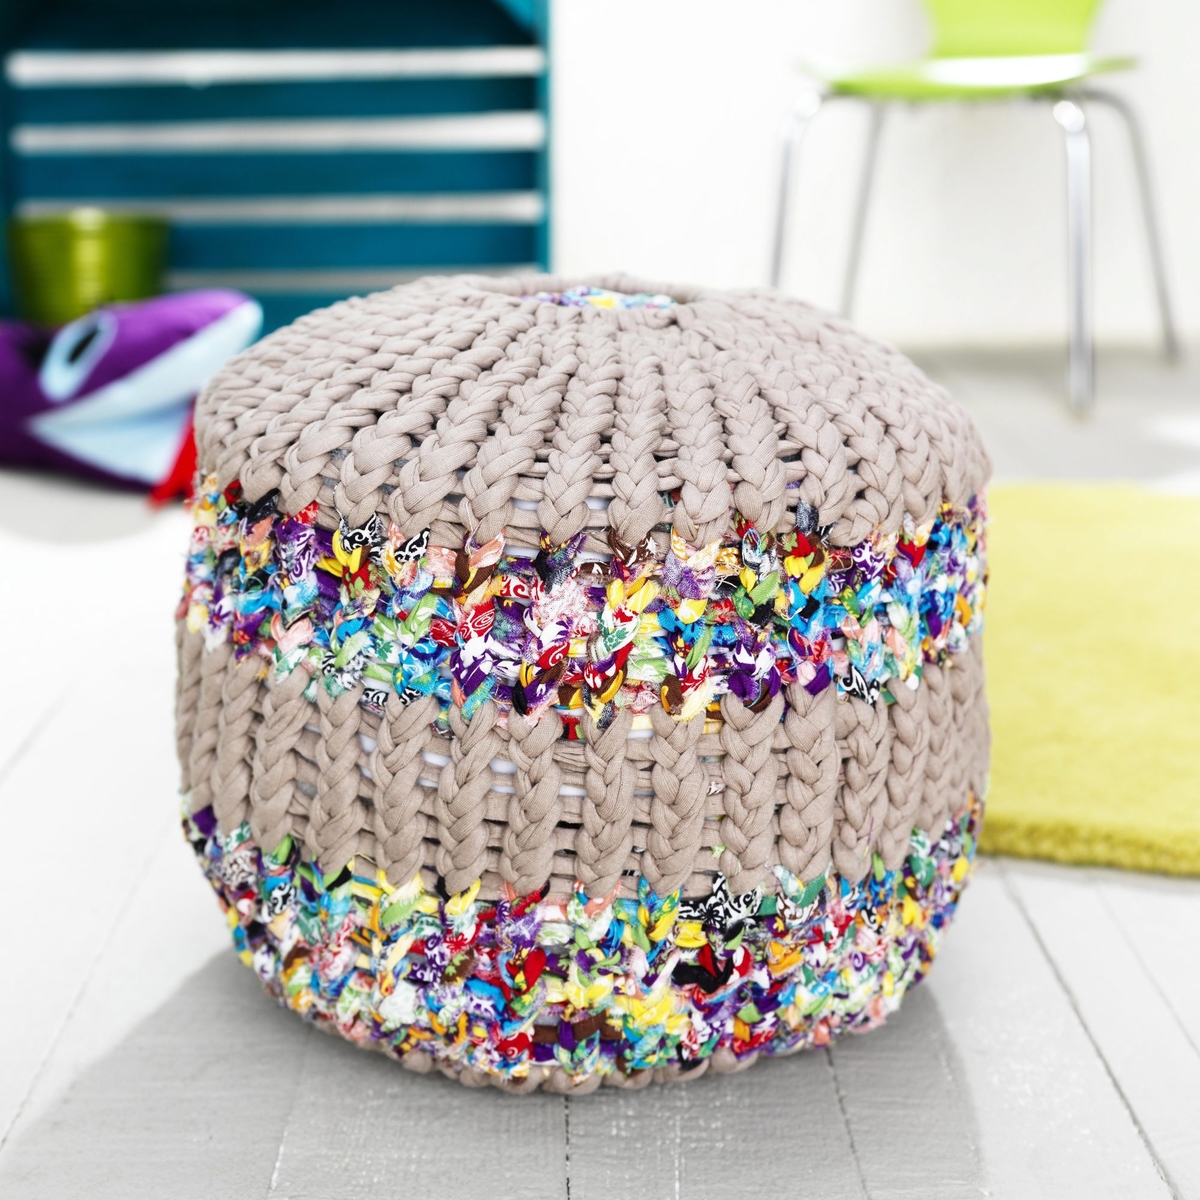 Knit a footstool!